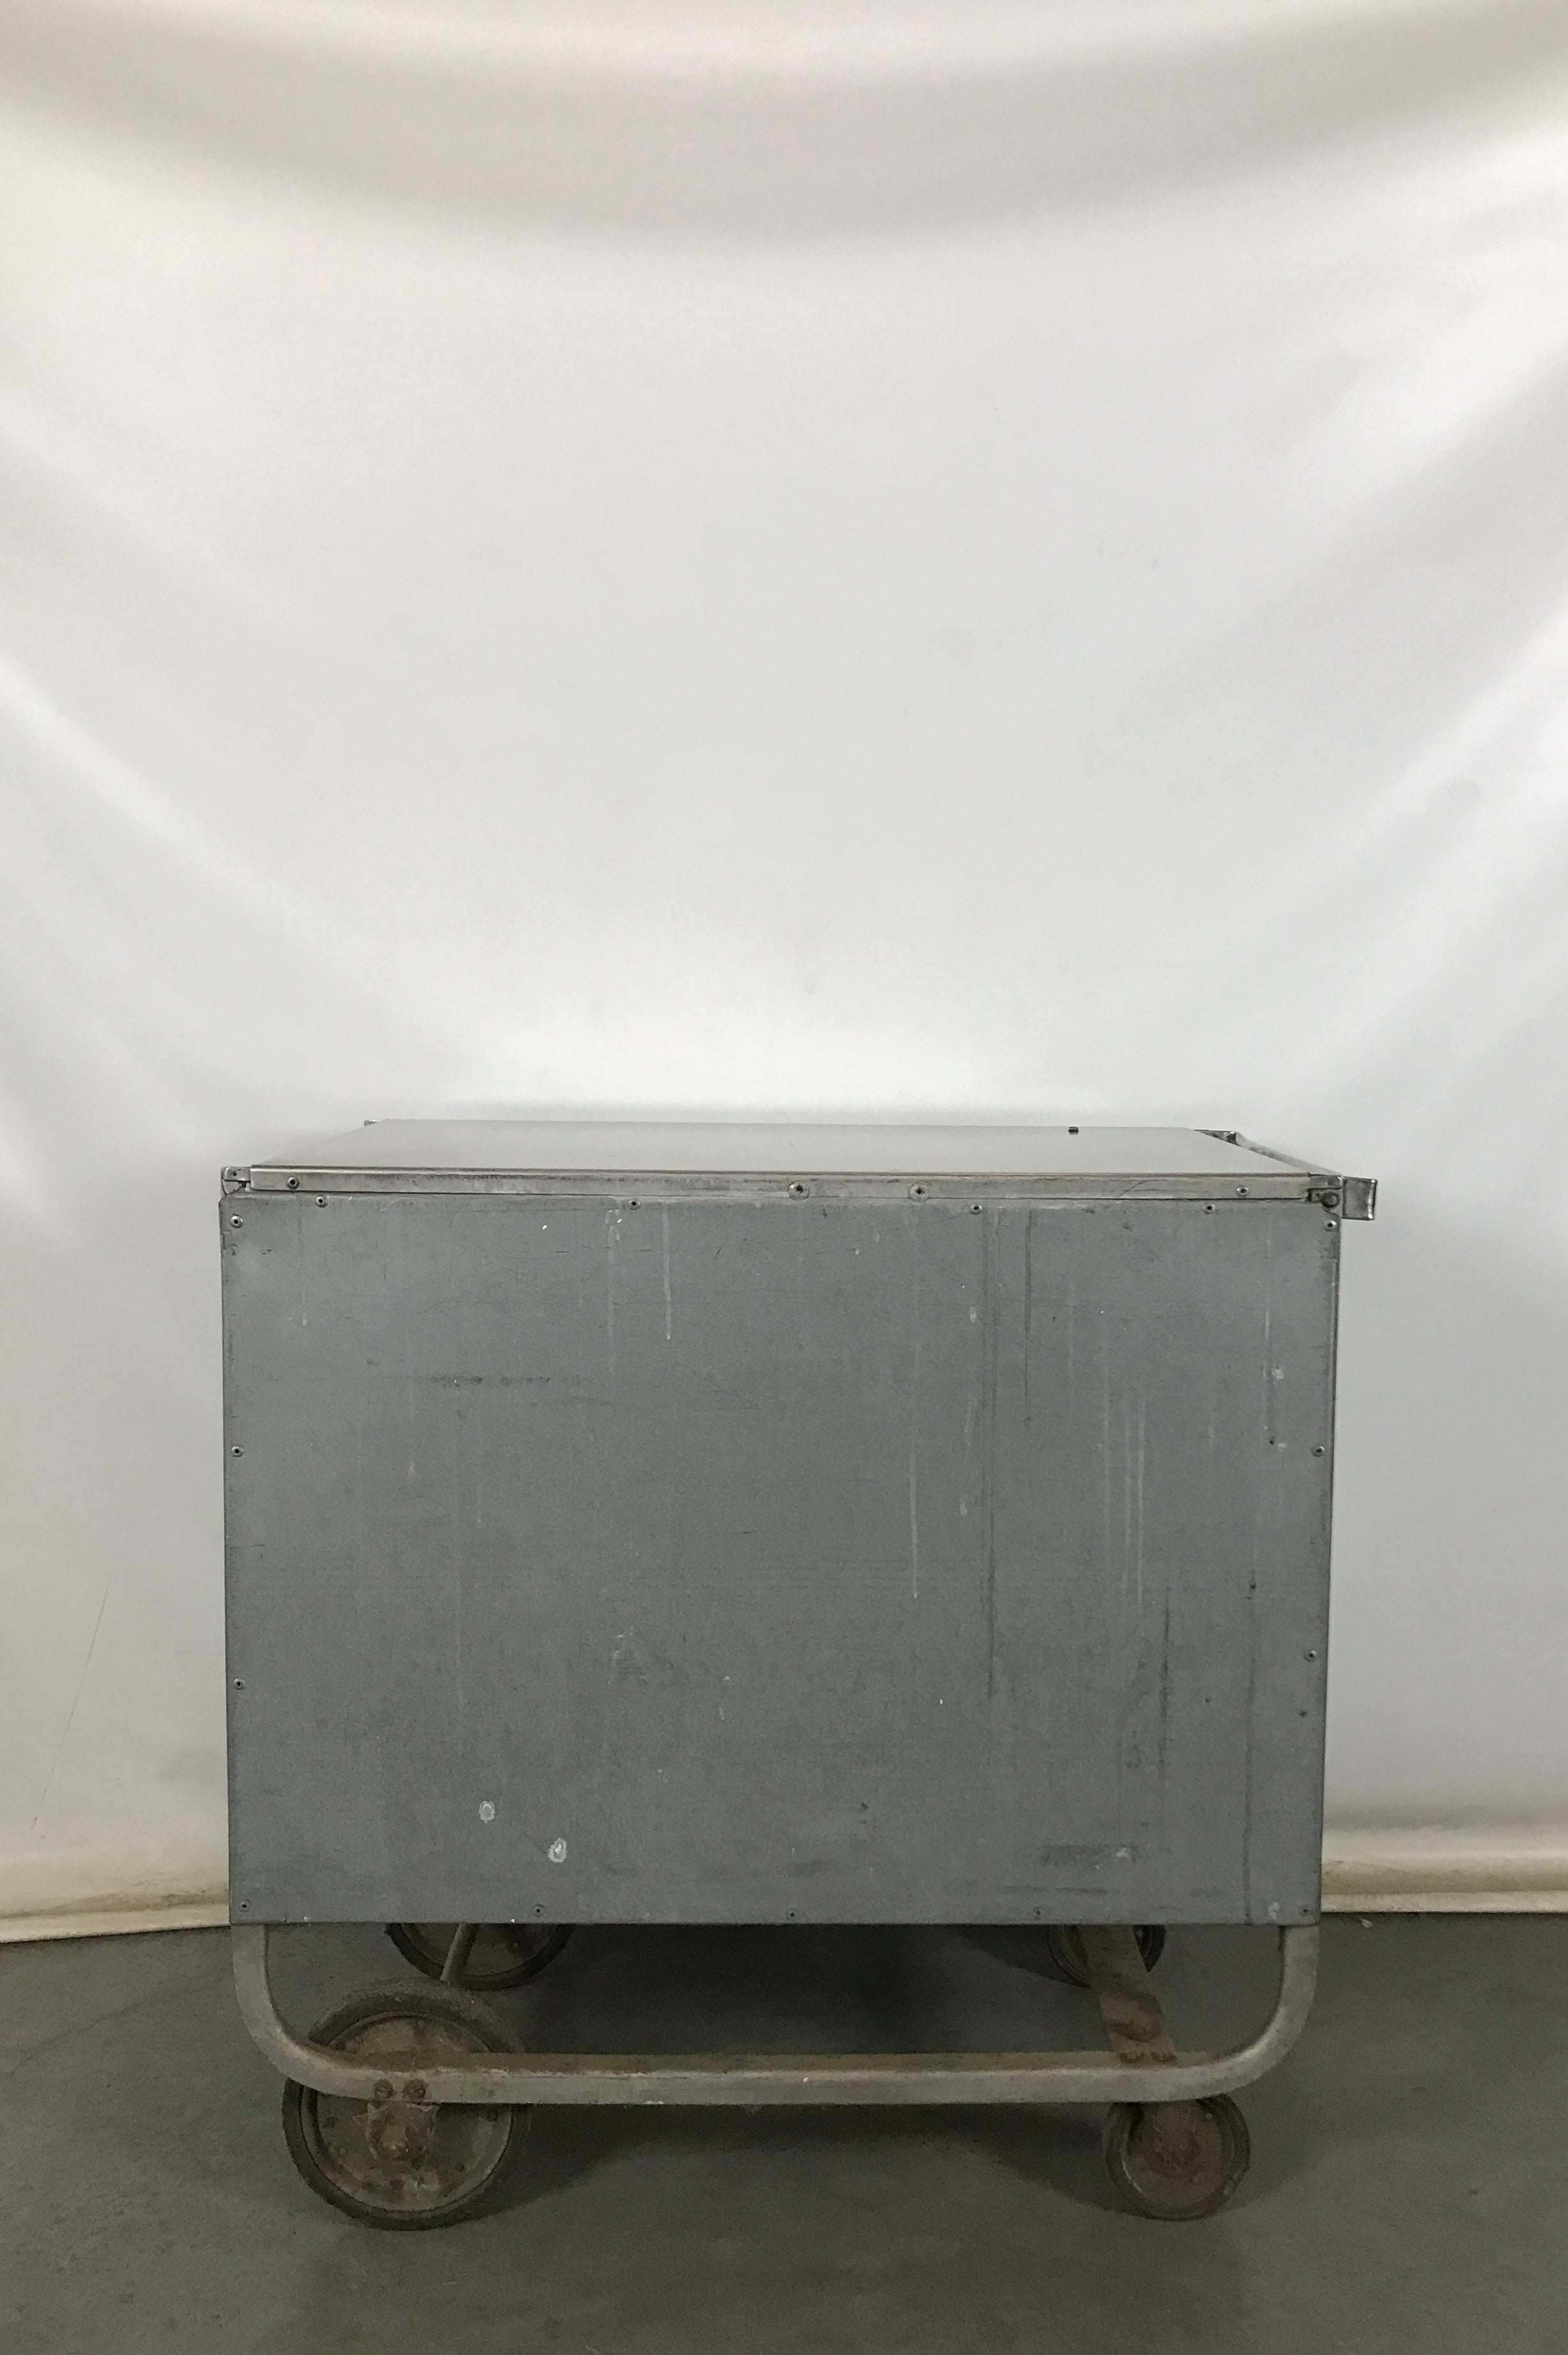 Stainless Steel Rolling Cart